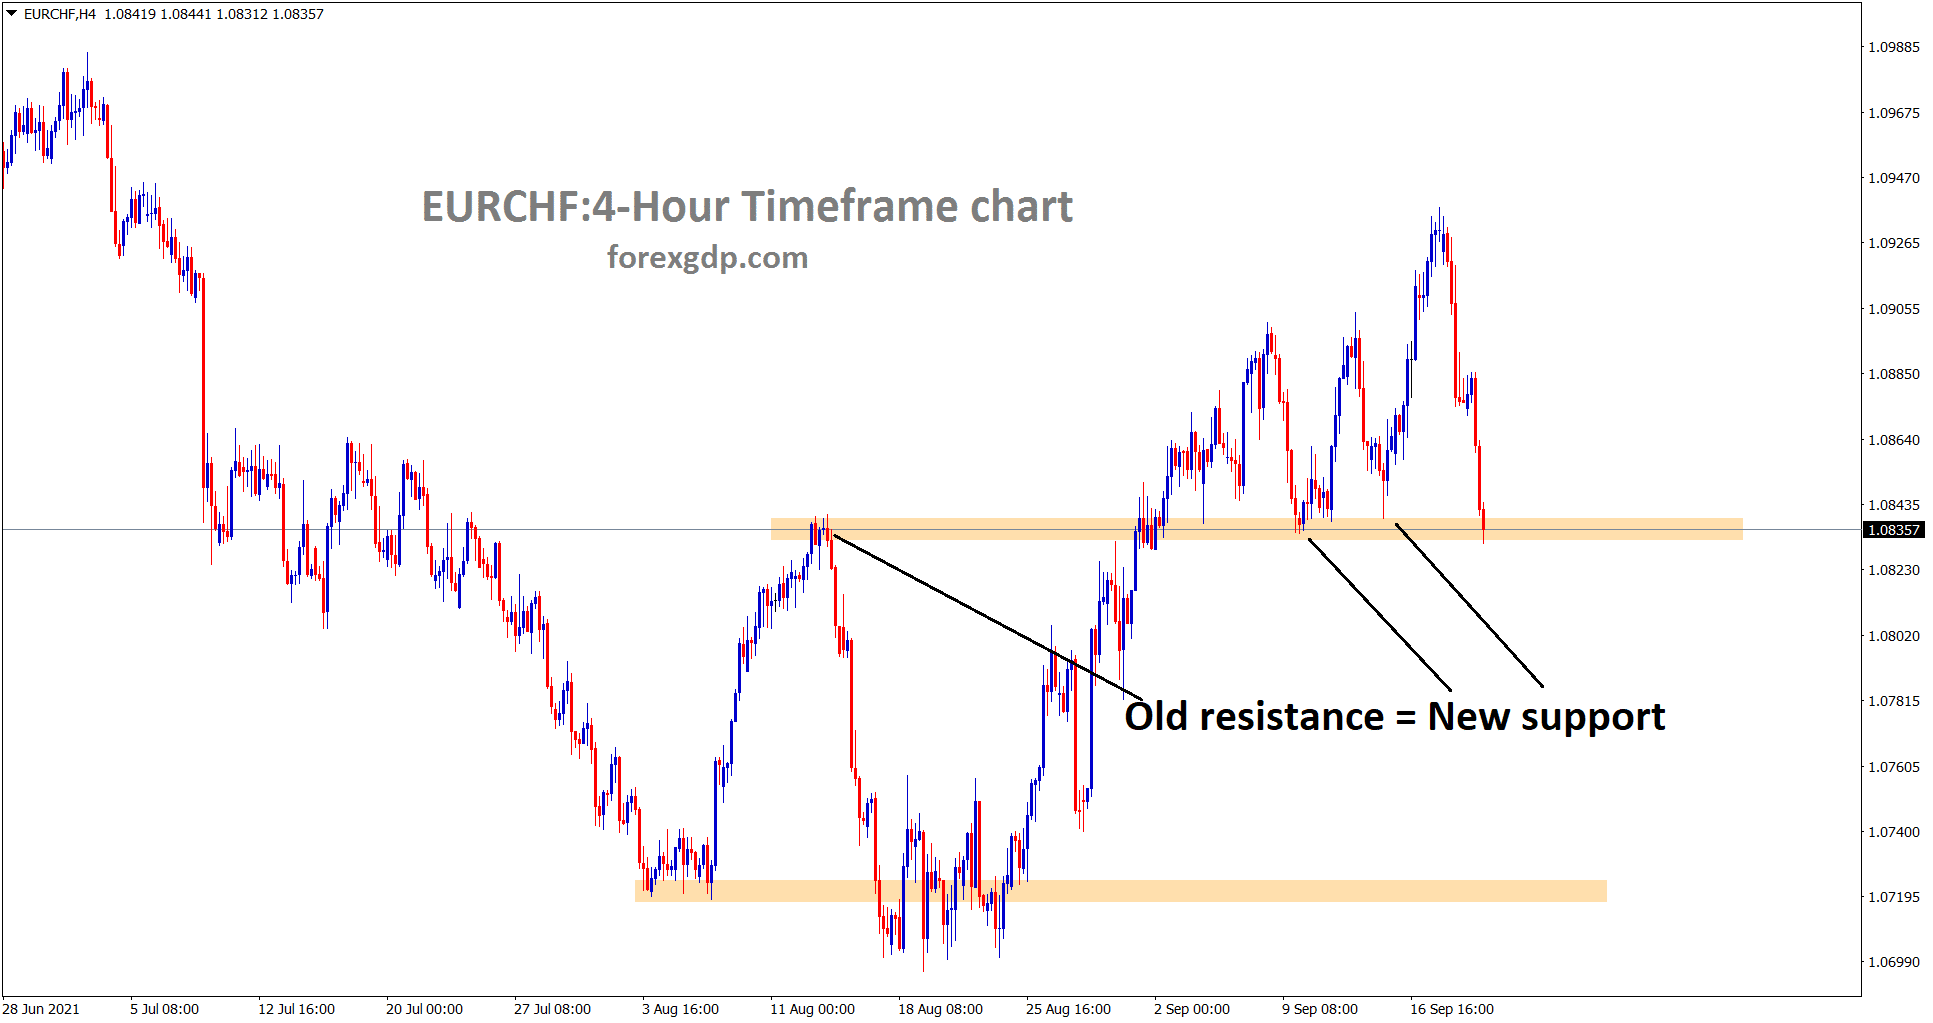 EURCHF has reached the old resistance area again which acted before as a support lets wait for reversal or breakout